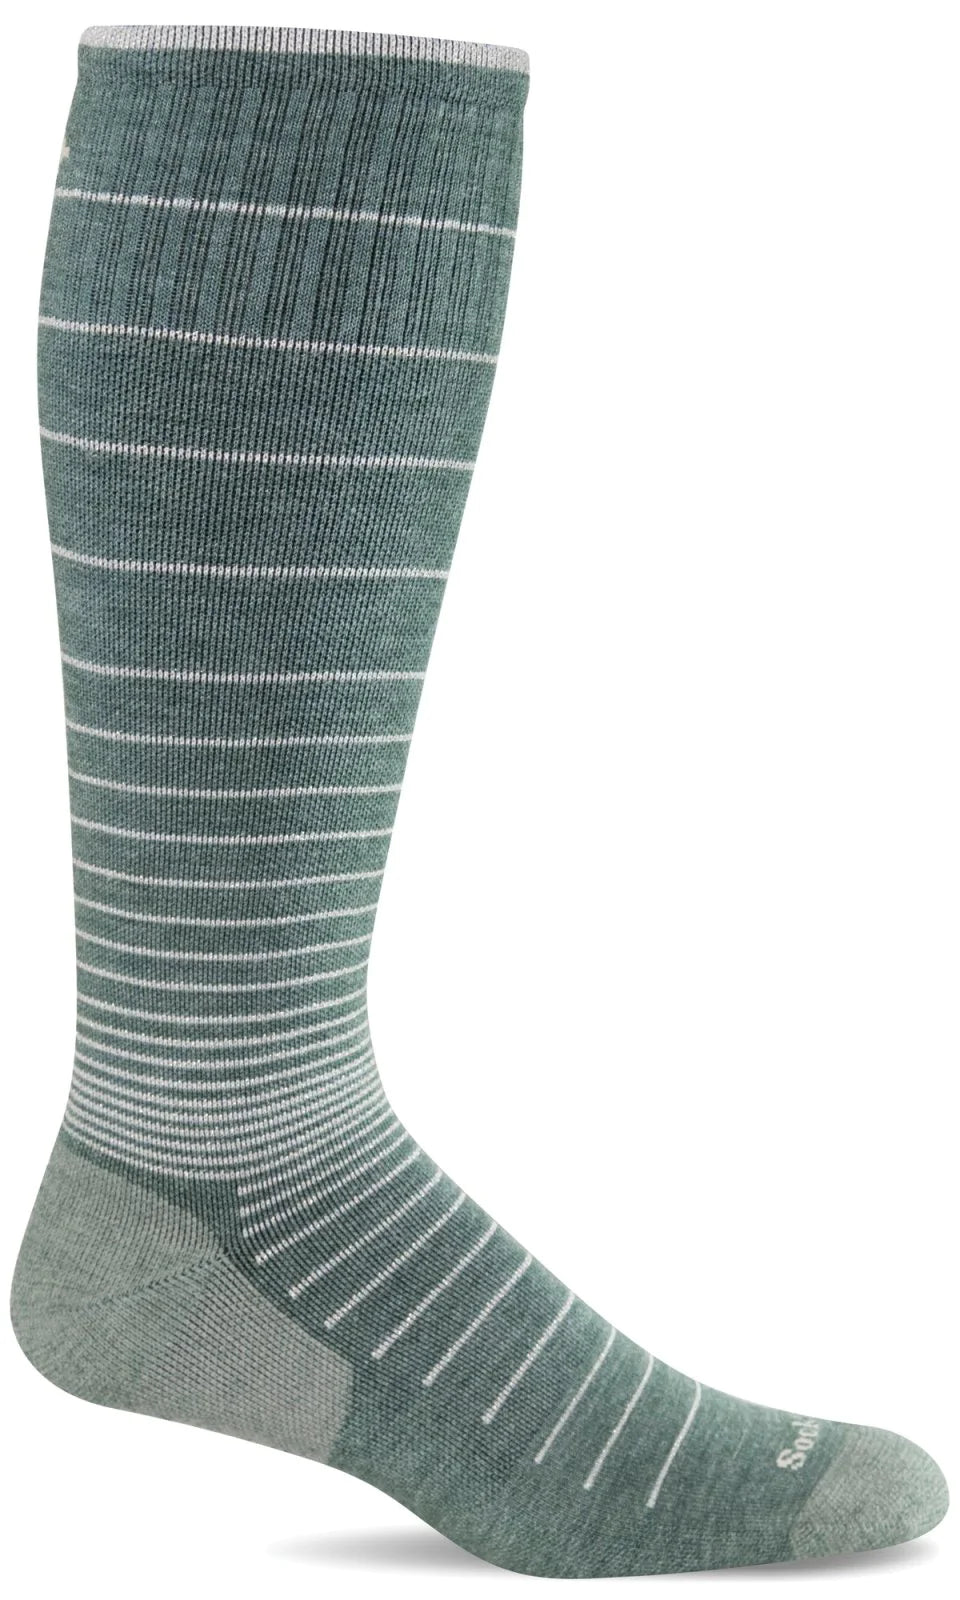 Graduated compression sock with sparkles in green - The Sockery